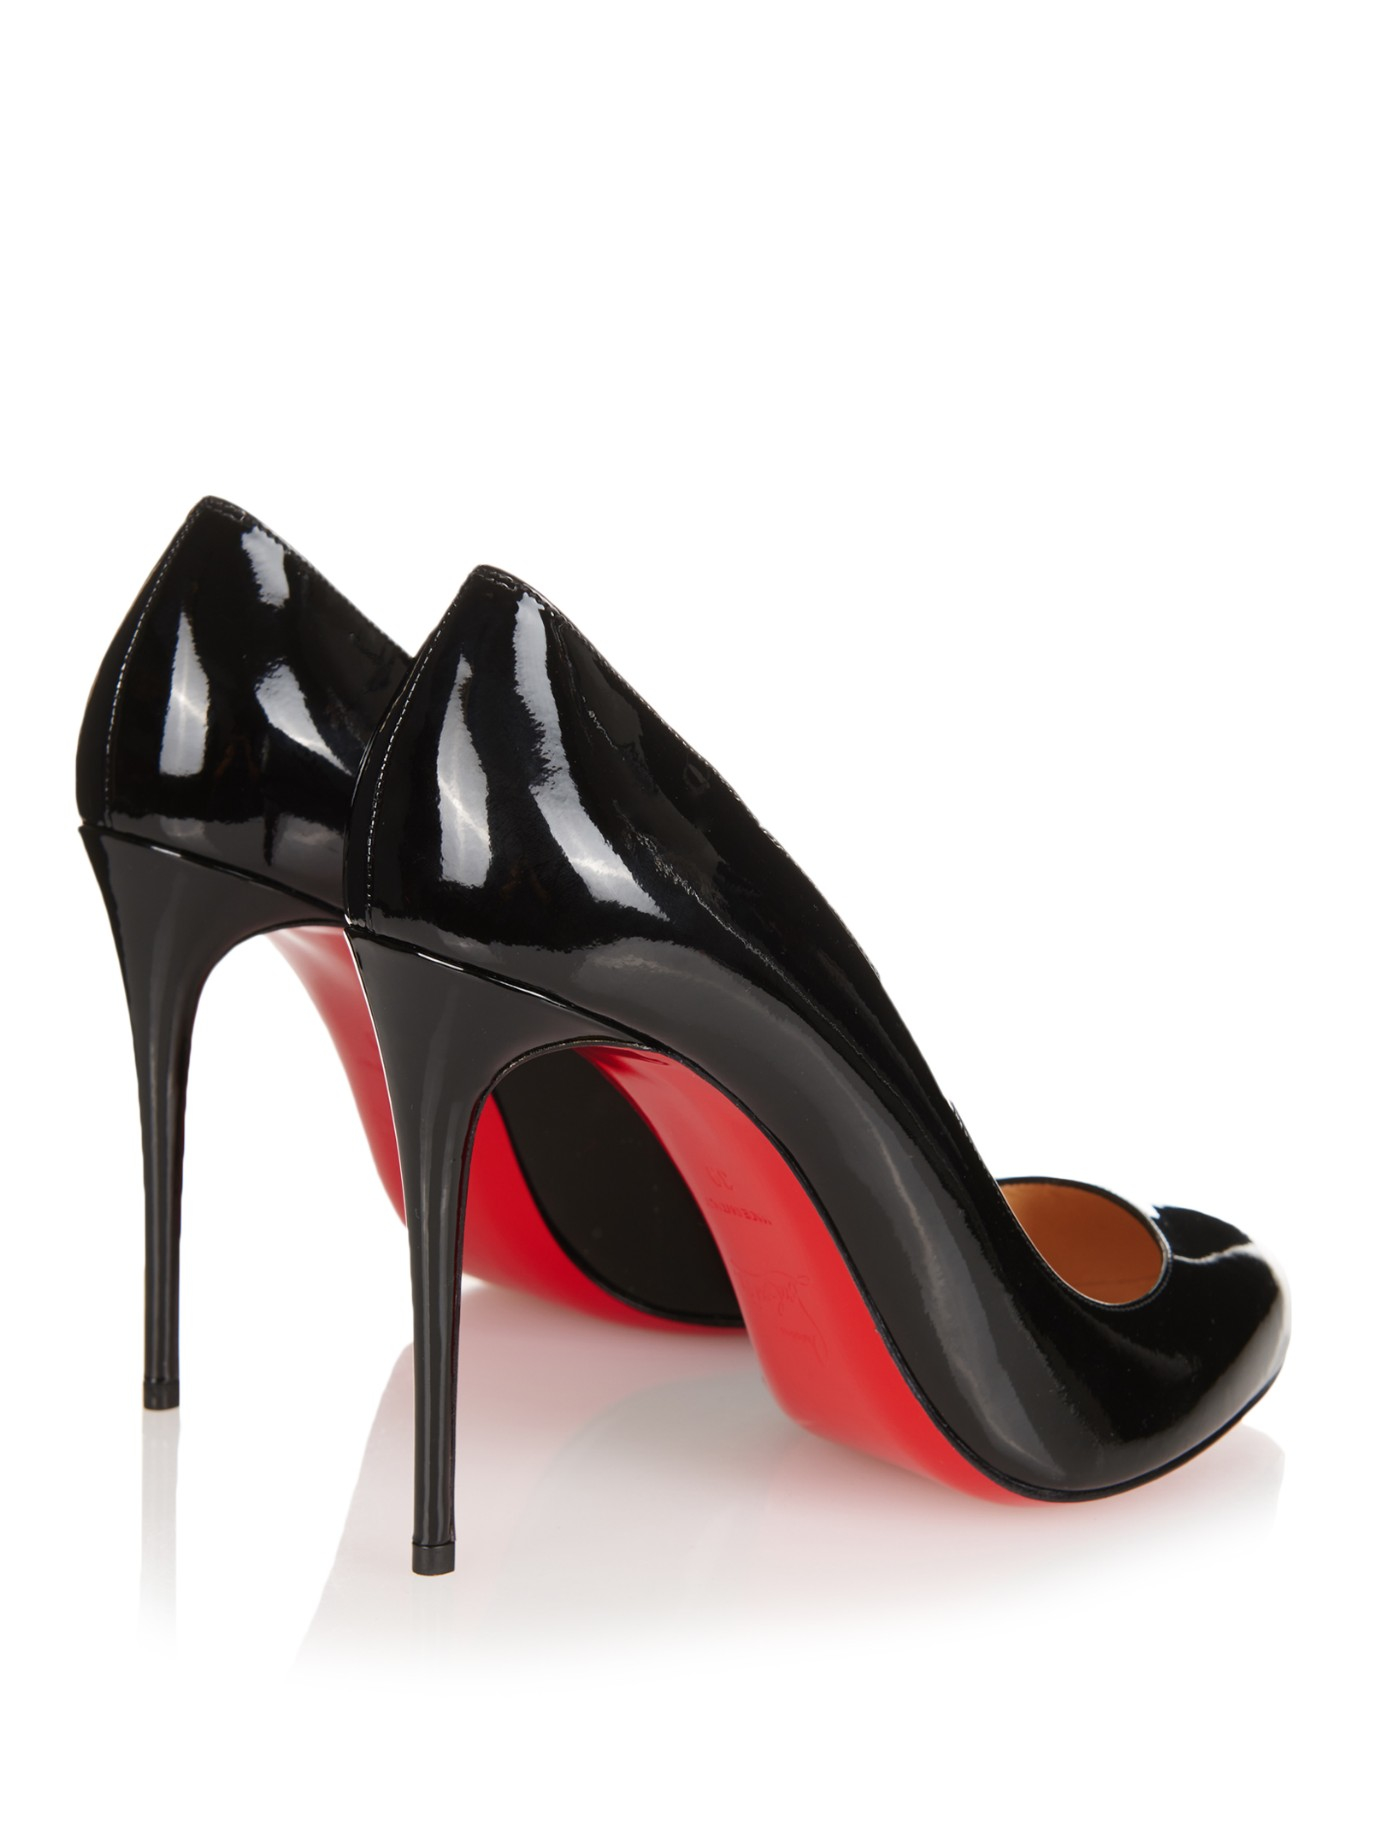 Lyst - Christian Louboutin Dorissima Leather Pumps in Black